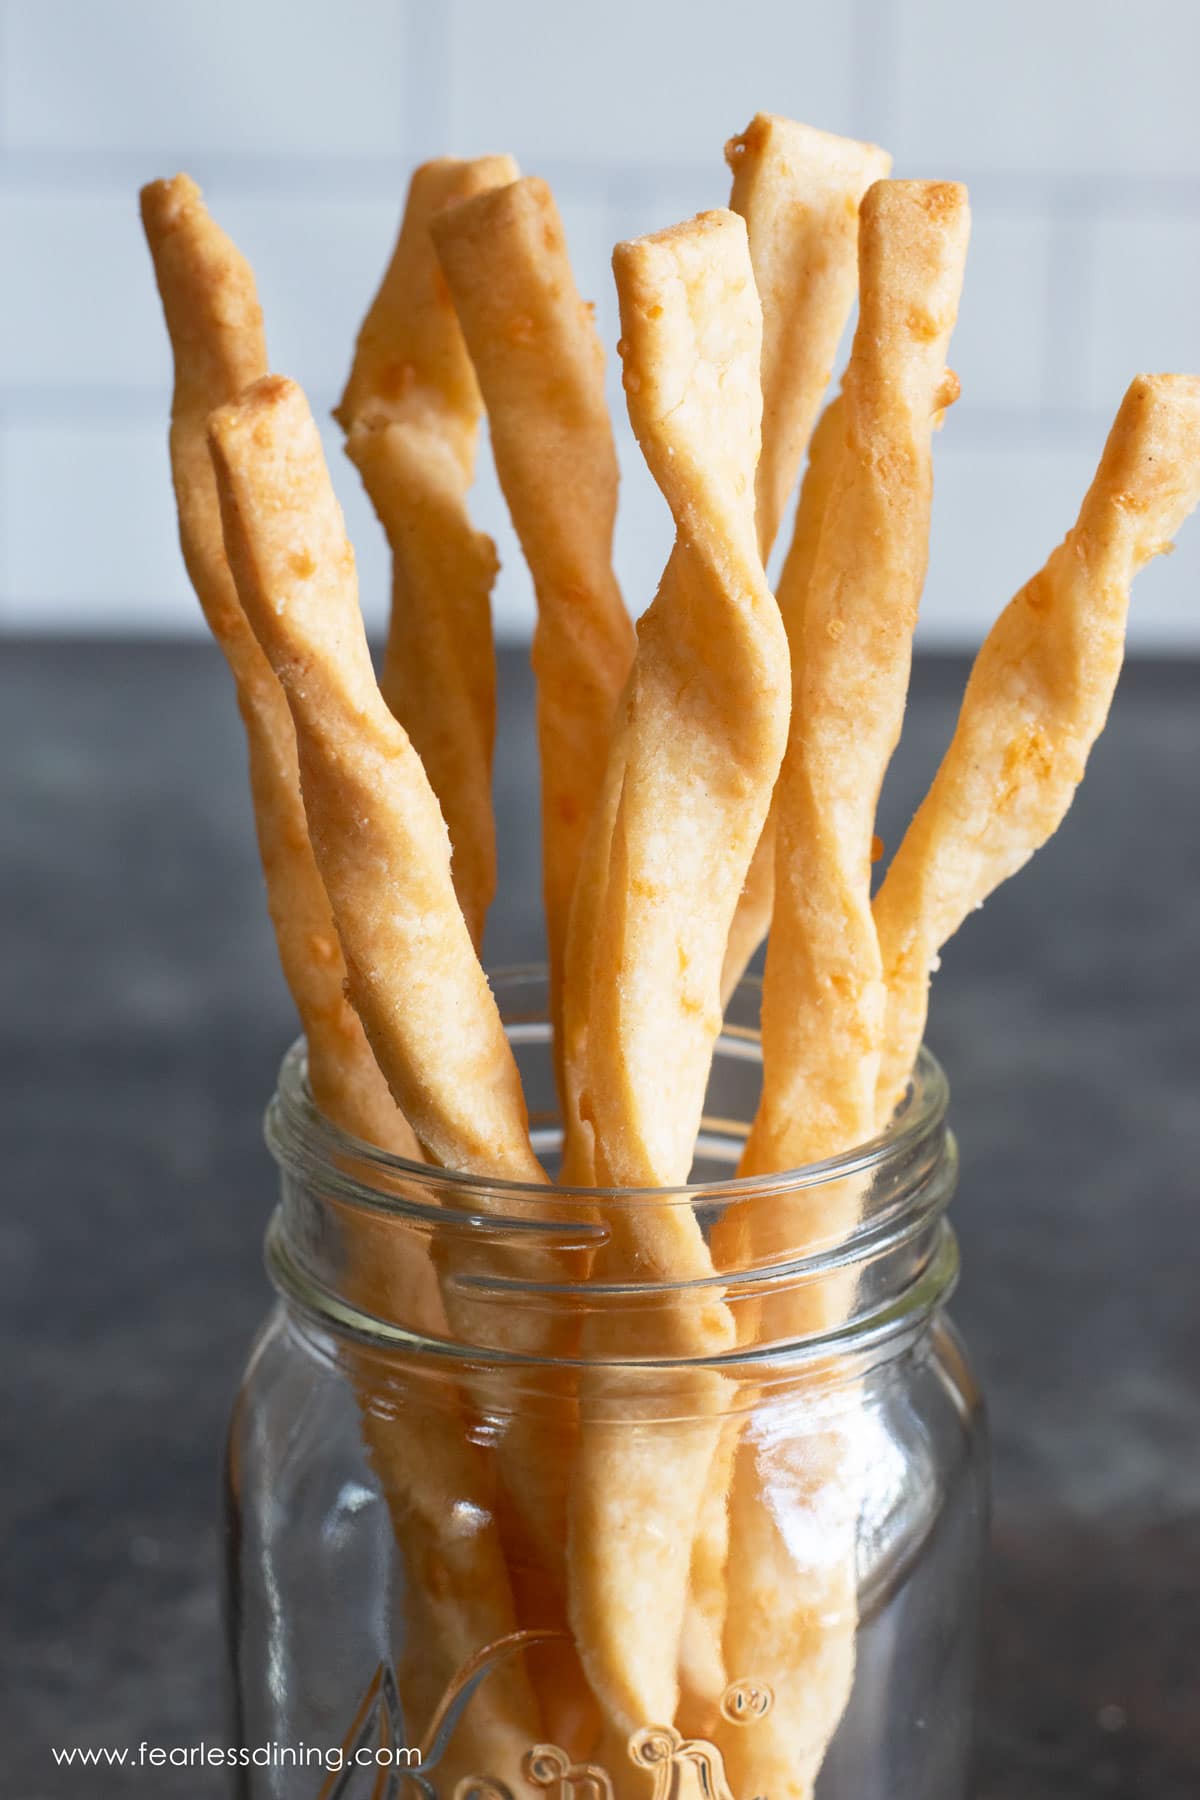 A close up view of the cheese straws.